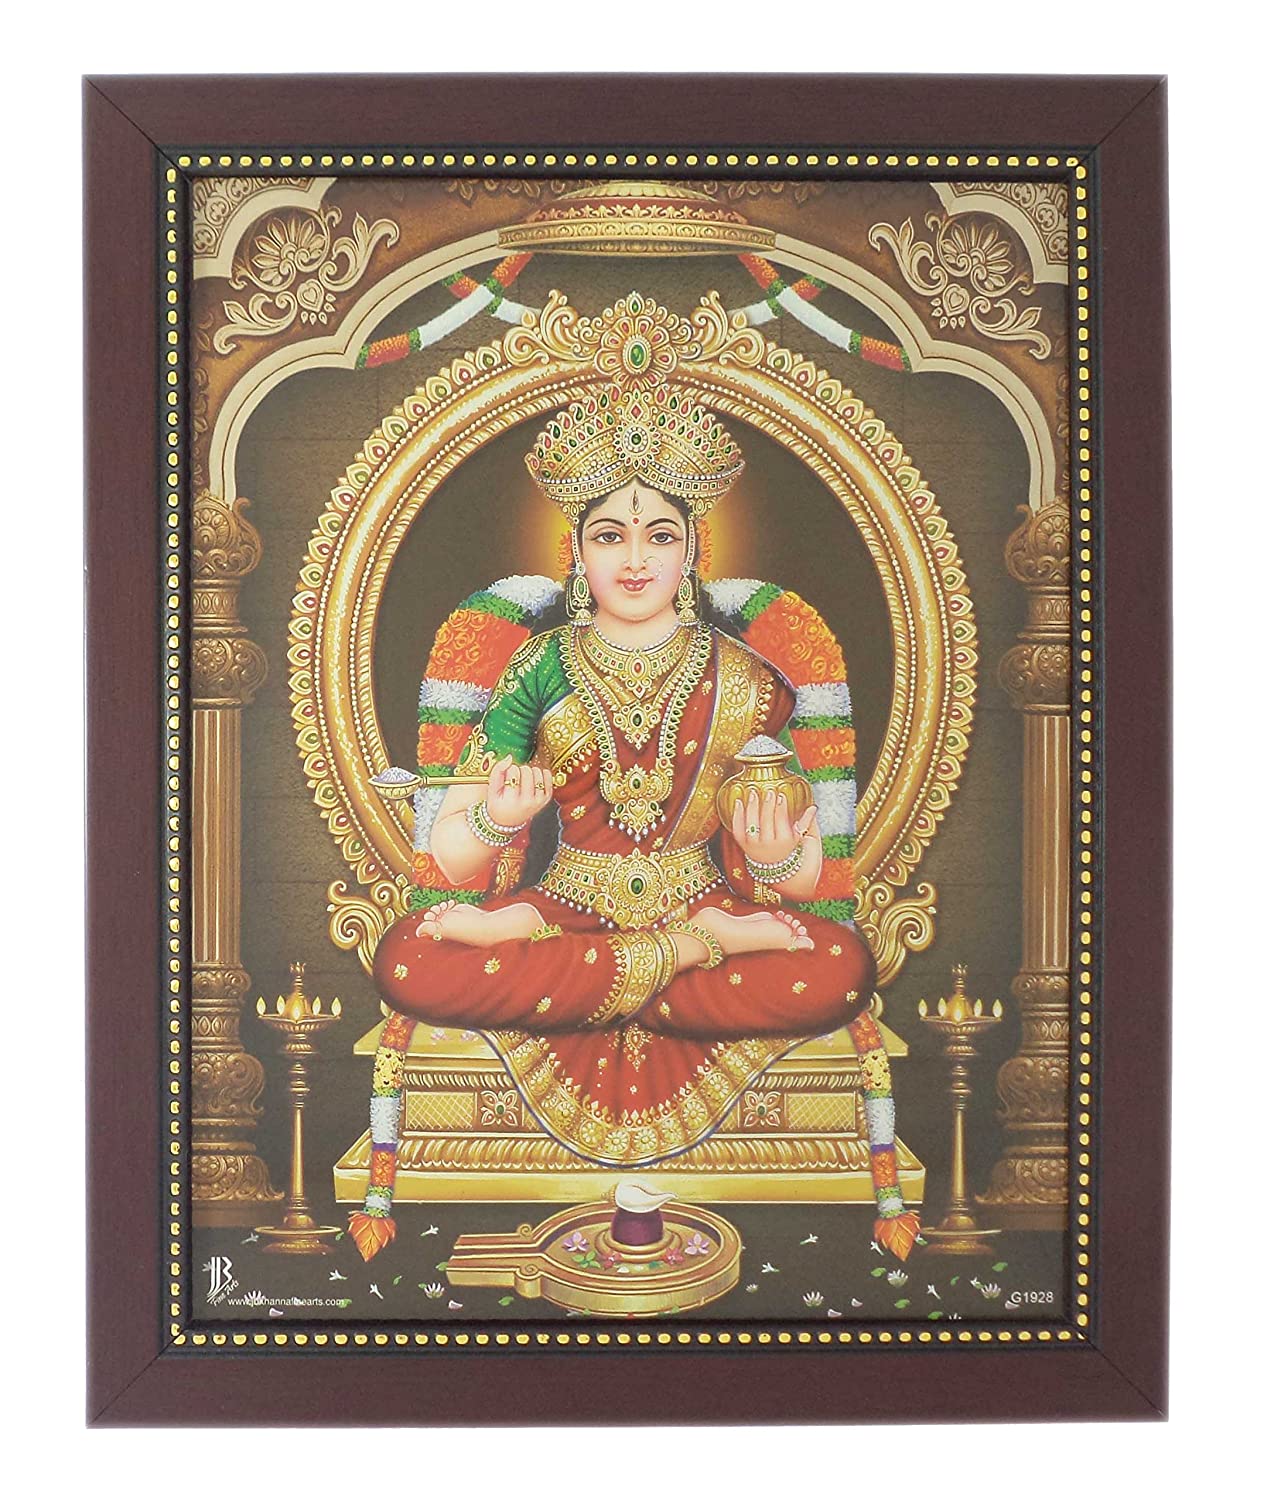 Goddess Annapoorni Devi Photo Frame ( 32.5 cm x 26.5 cm x 1.5 cm ) / Wall Hangings for Home Decor and Wall Decor / Thanksgiving Wall Decorations / annapoorni annapoorna devi